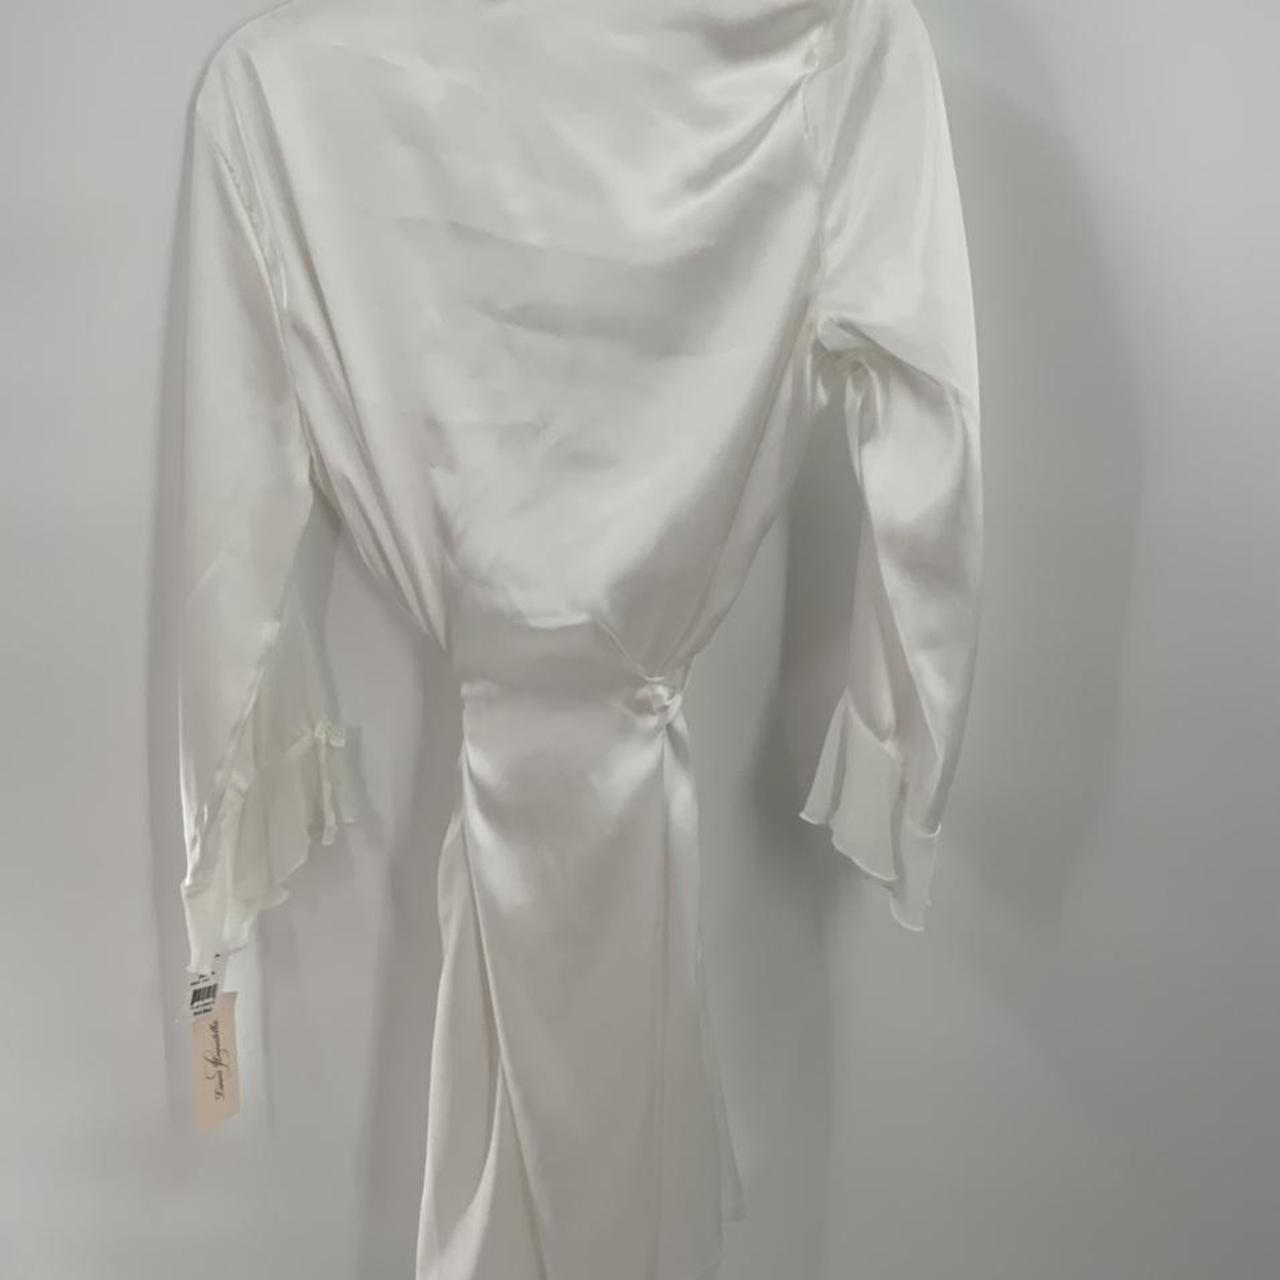 Stunning white silky robe New with tags Perfect for... - Depop